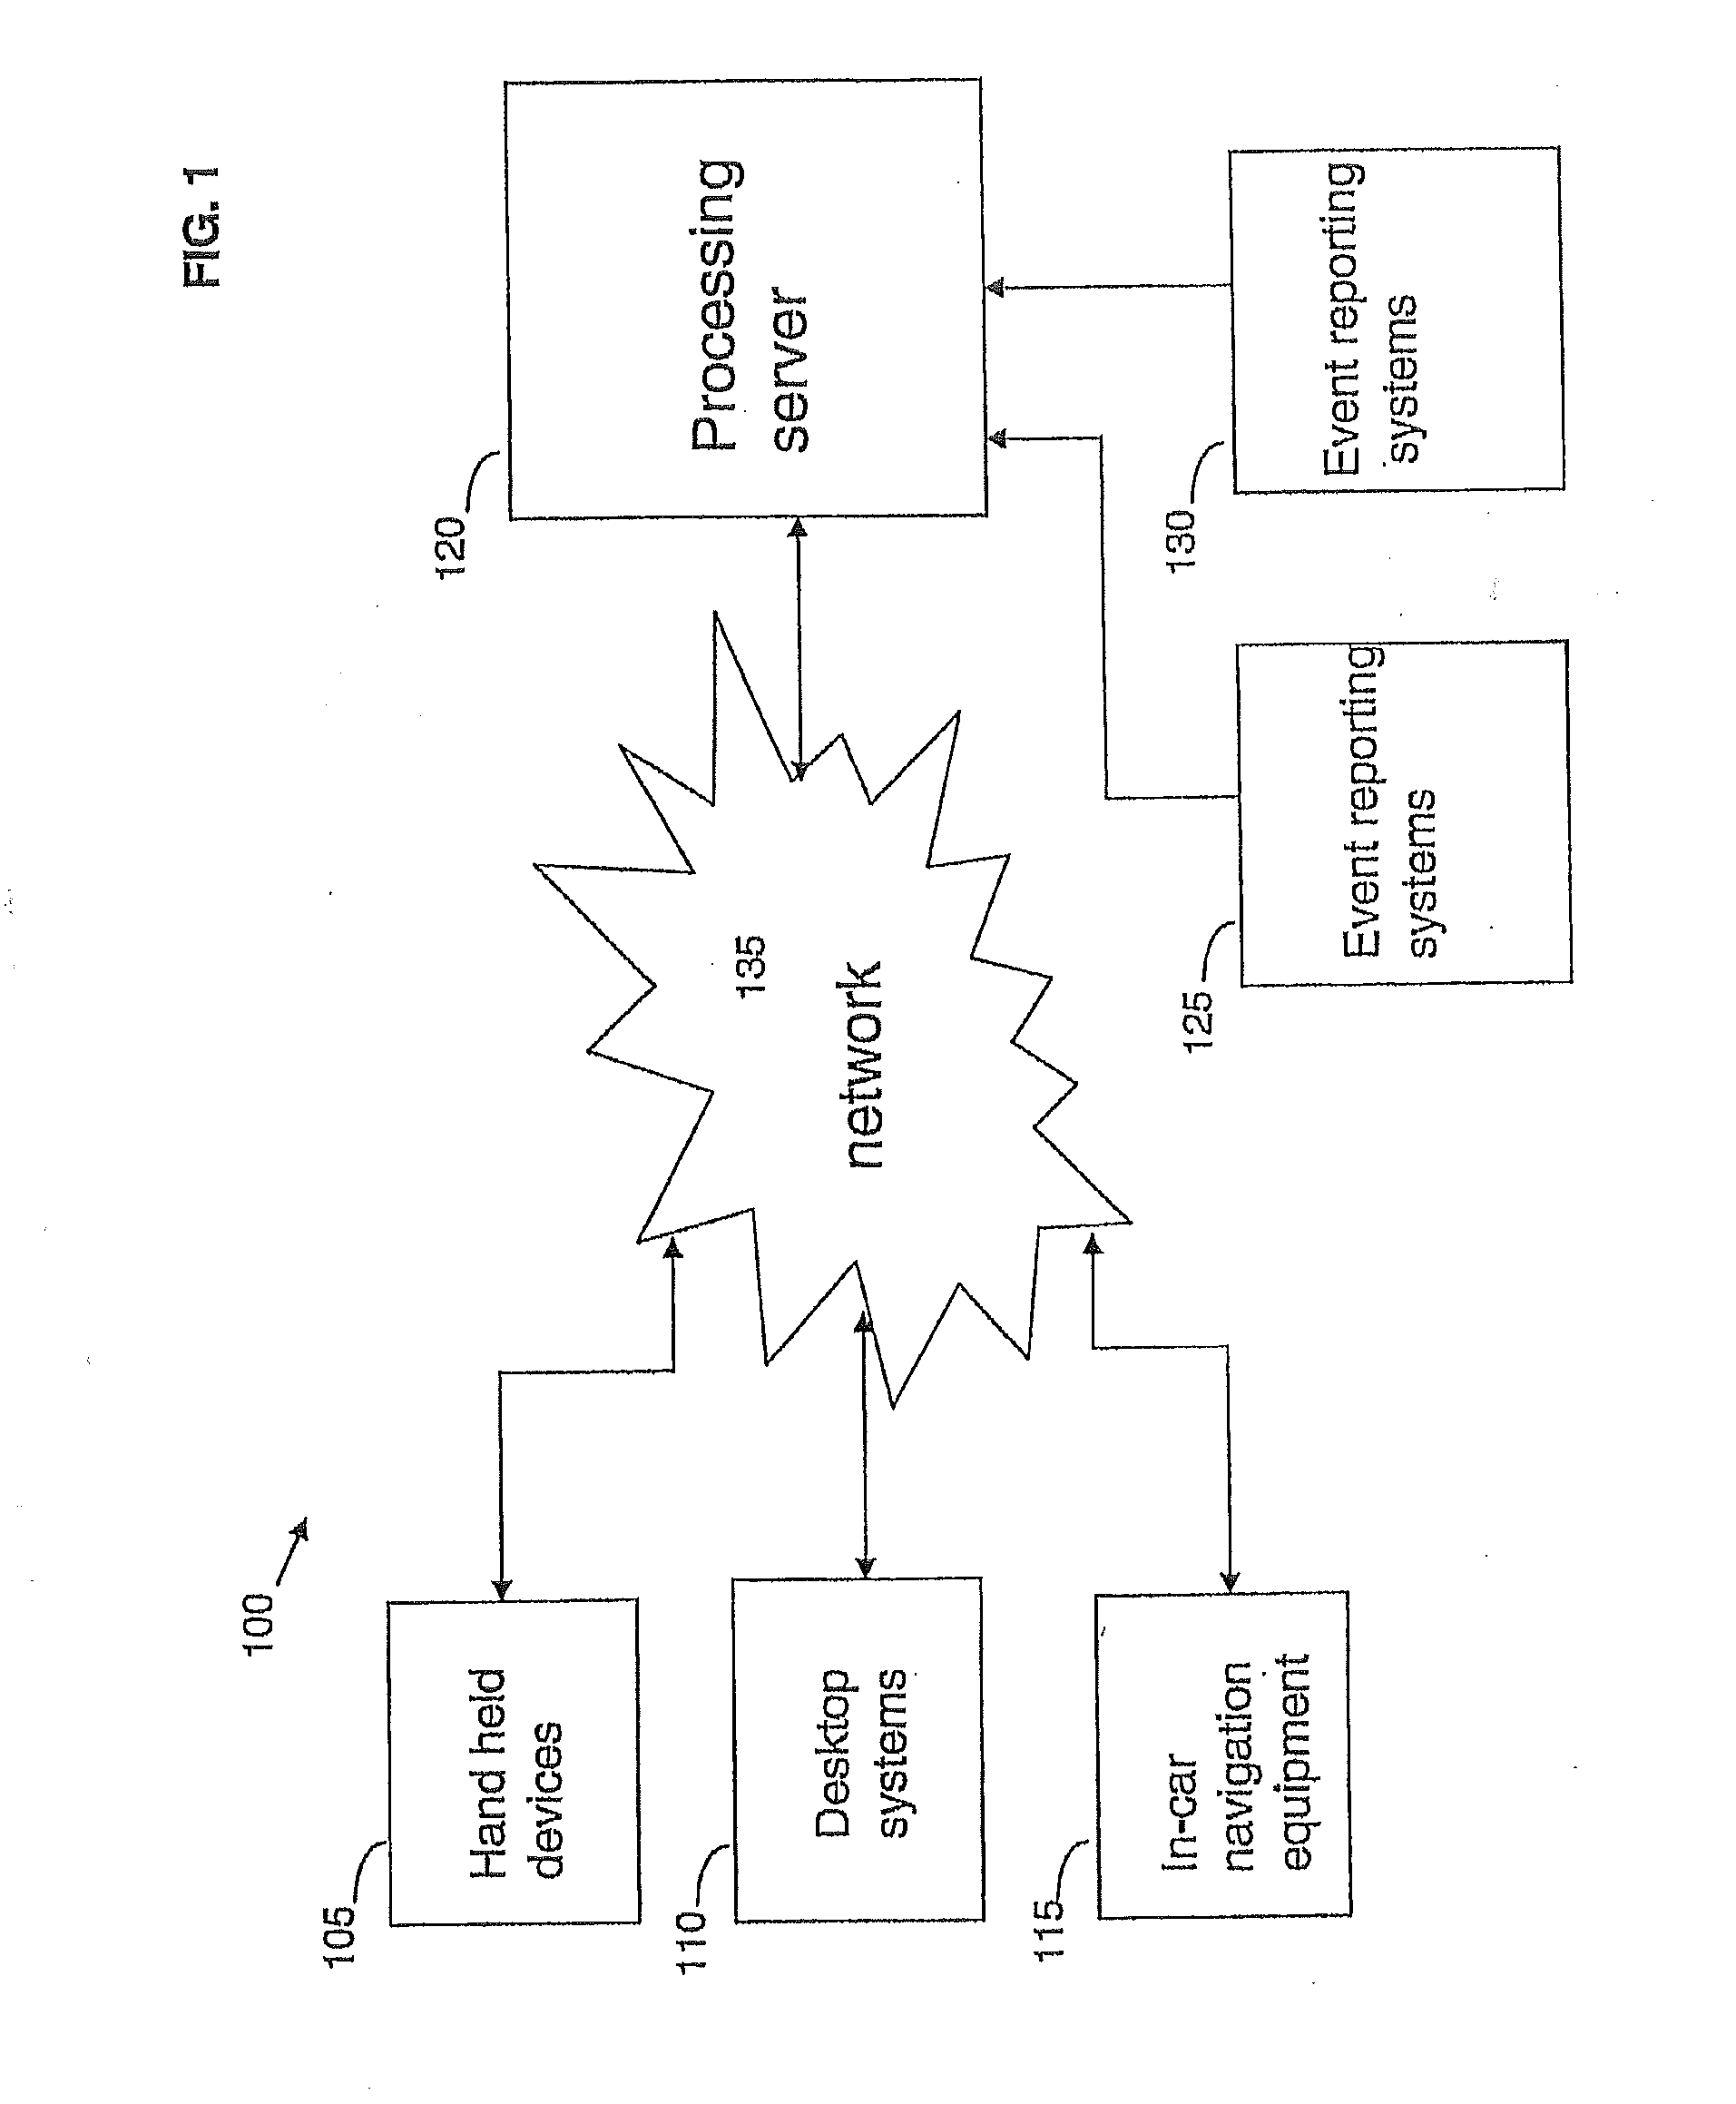 Method and apparatus for providing location specific information